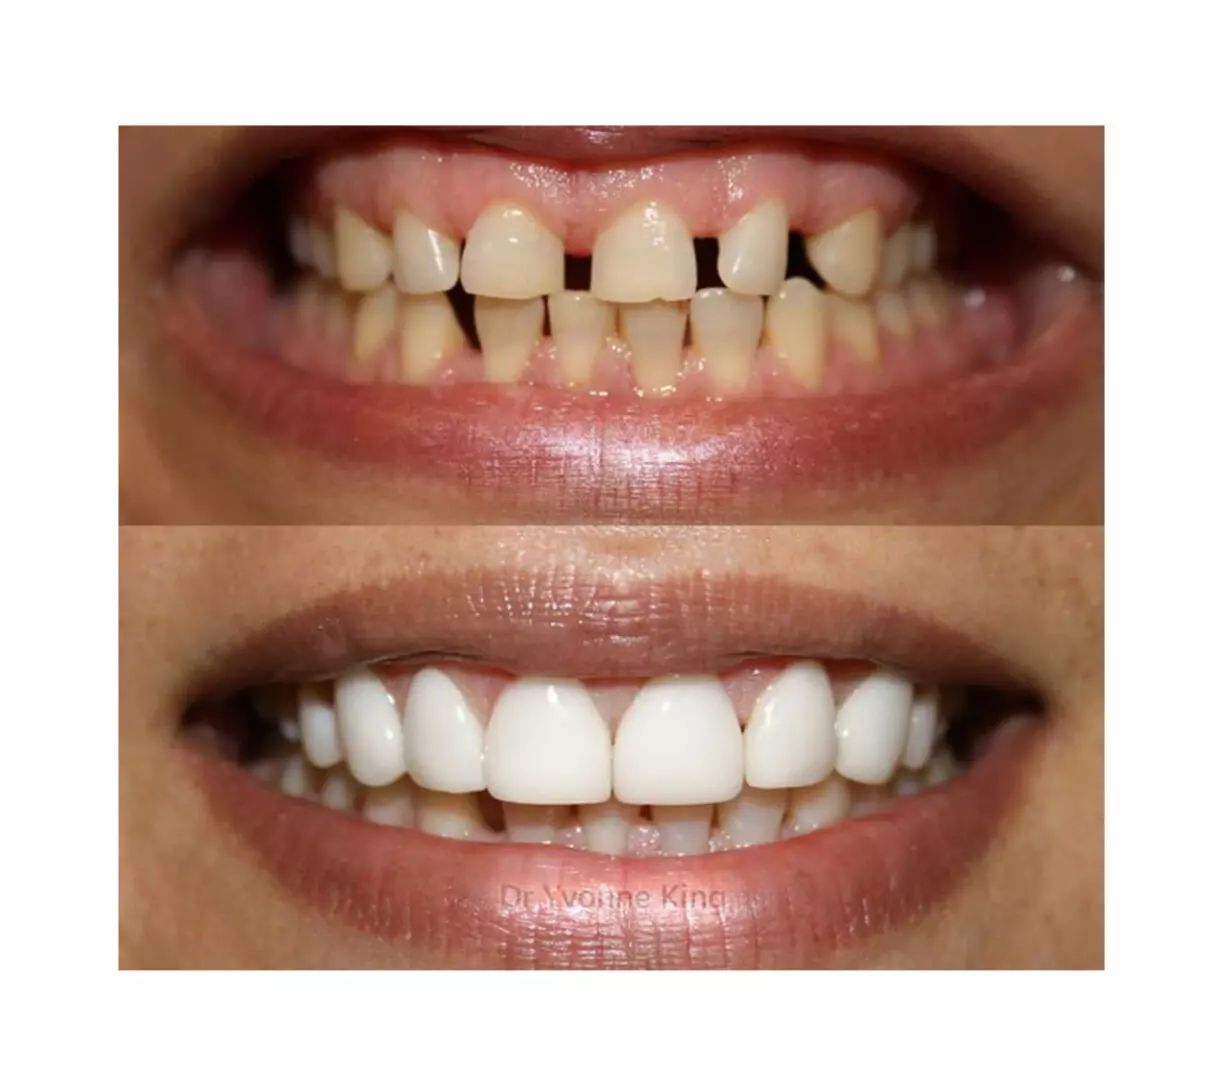 Before and after pictures of our cosmetic dental treatments